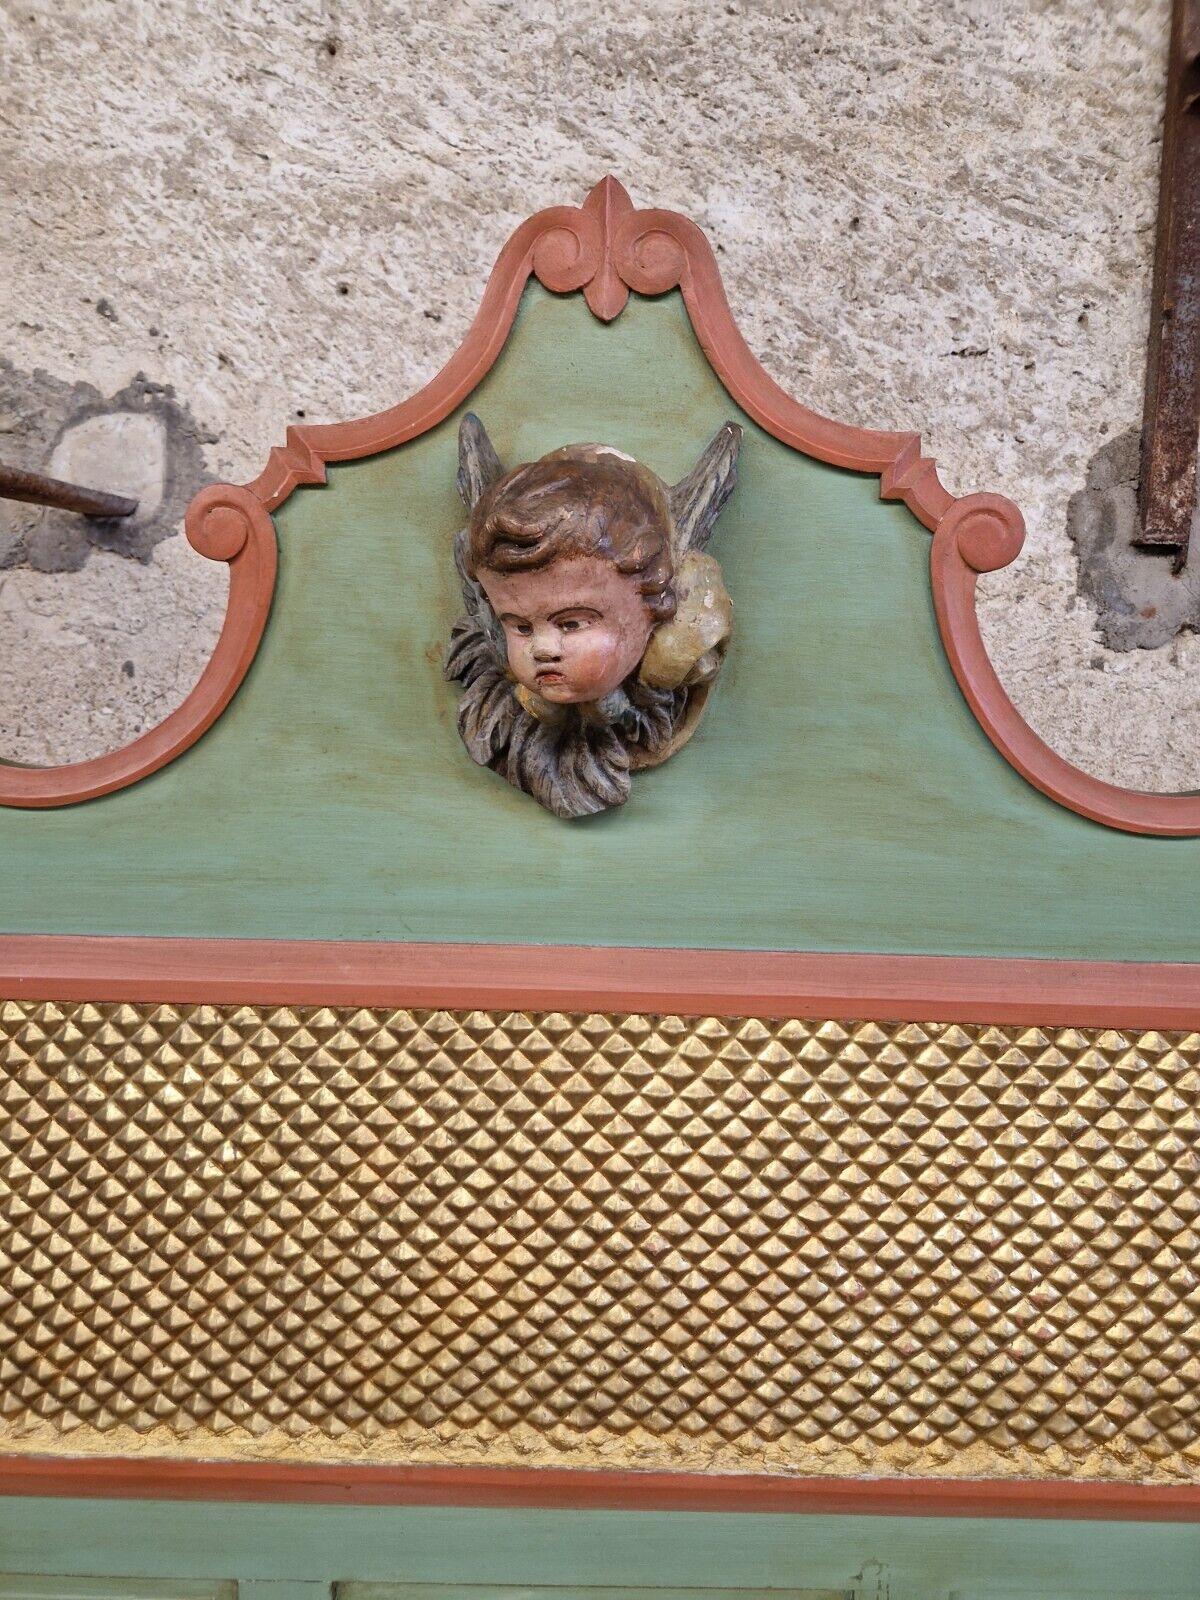 We are delighted to offer for sale this Fabulous Italian x4 Poster Bed

This Bed is so Artistic & Unique!

Solid Wood
Great Condition

Painted in Green Lacquer

The Headboard has a Cherub Carving for the Crest

4 Bed Posts

Polychromed

Would